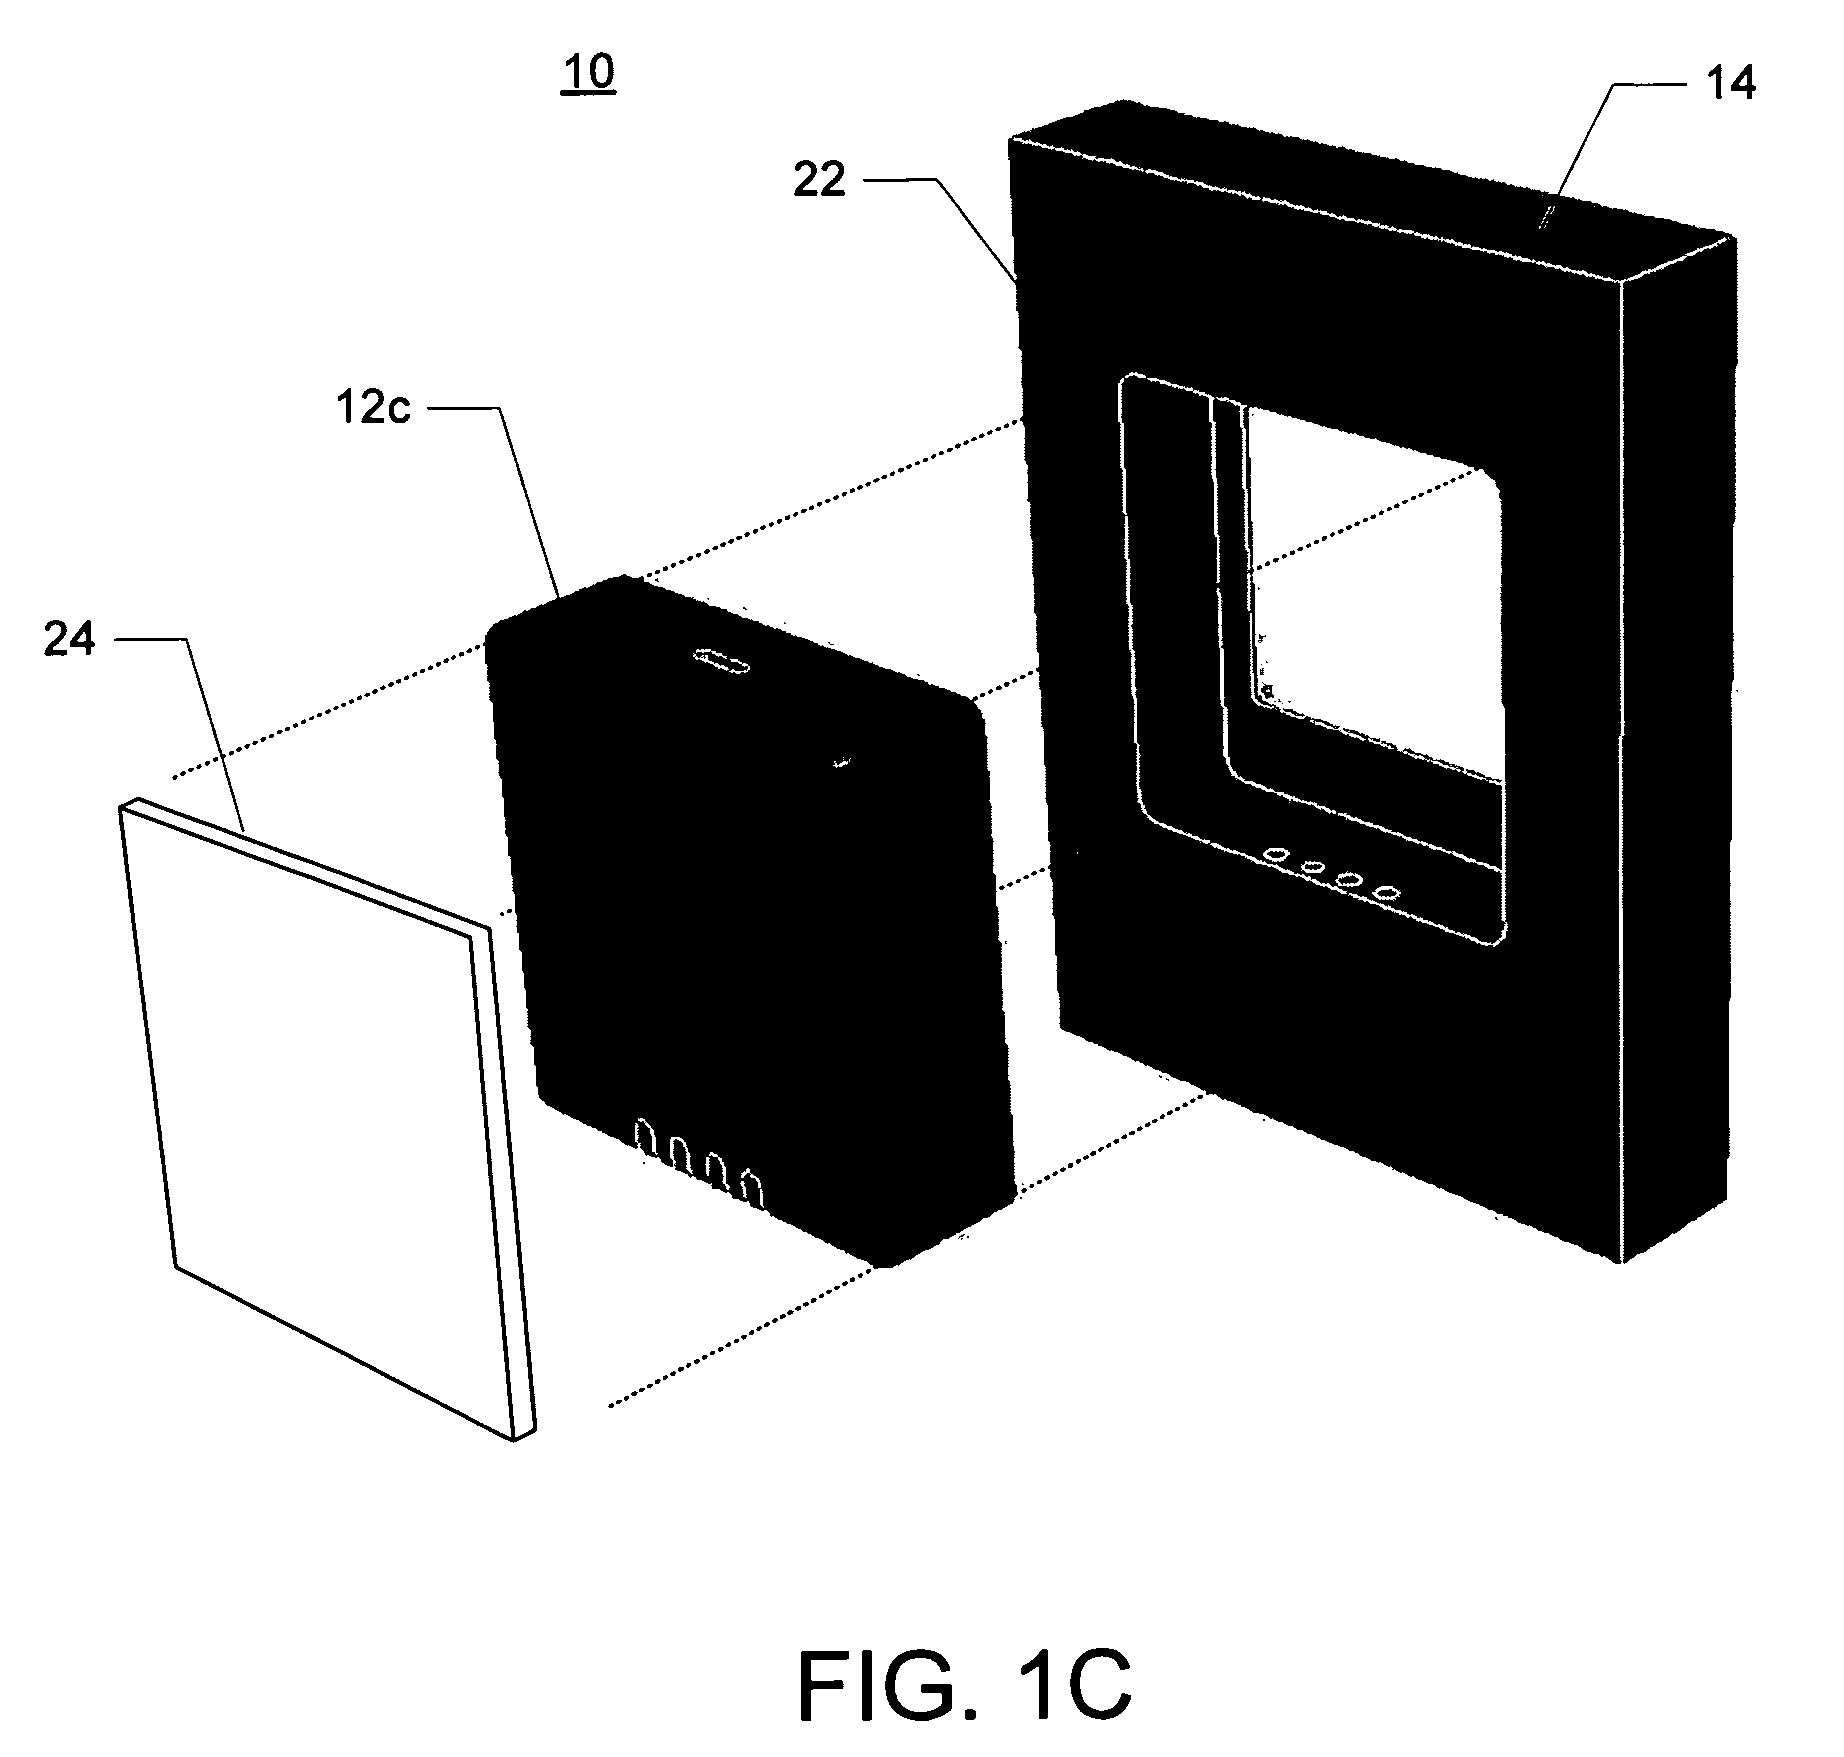 Modular movement that is fully functional standalone and interchangeable in other portable devices